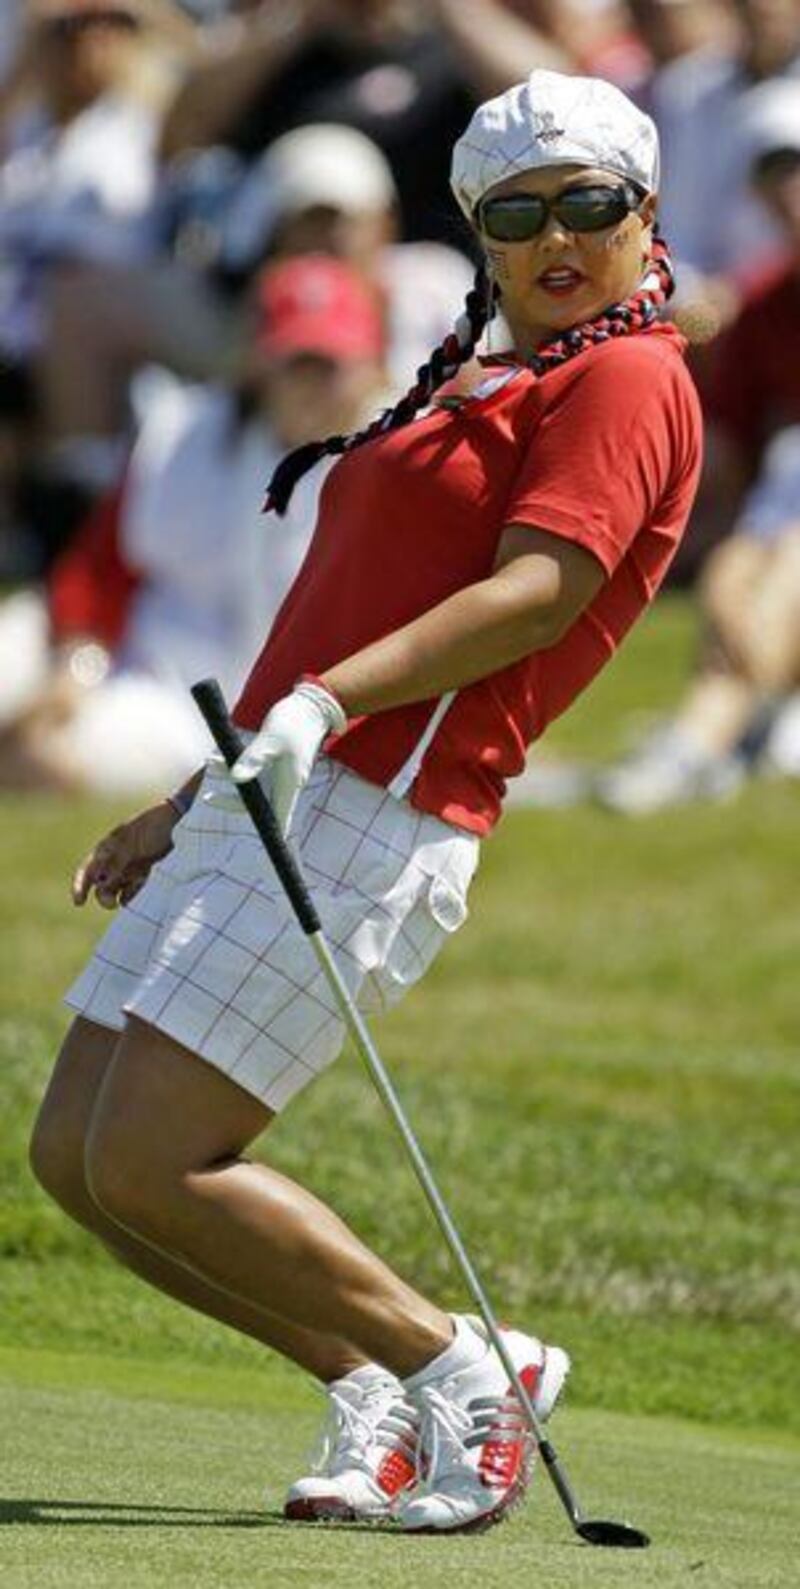 Christina Kim, all flying pigtails and earrings, was the player who worked the crowd better than anyone during the Solheim Cup.